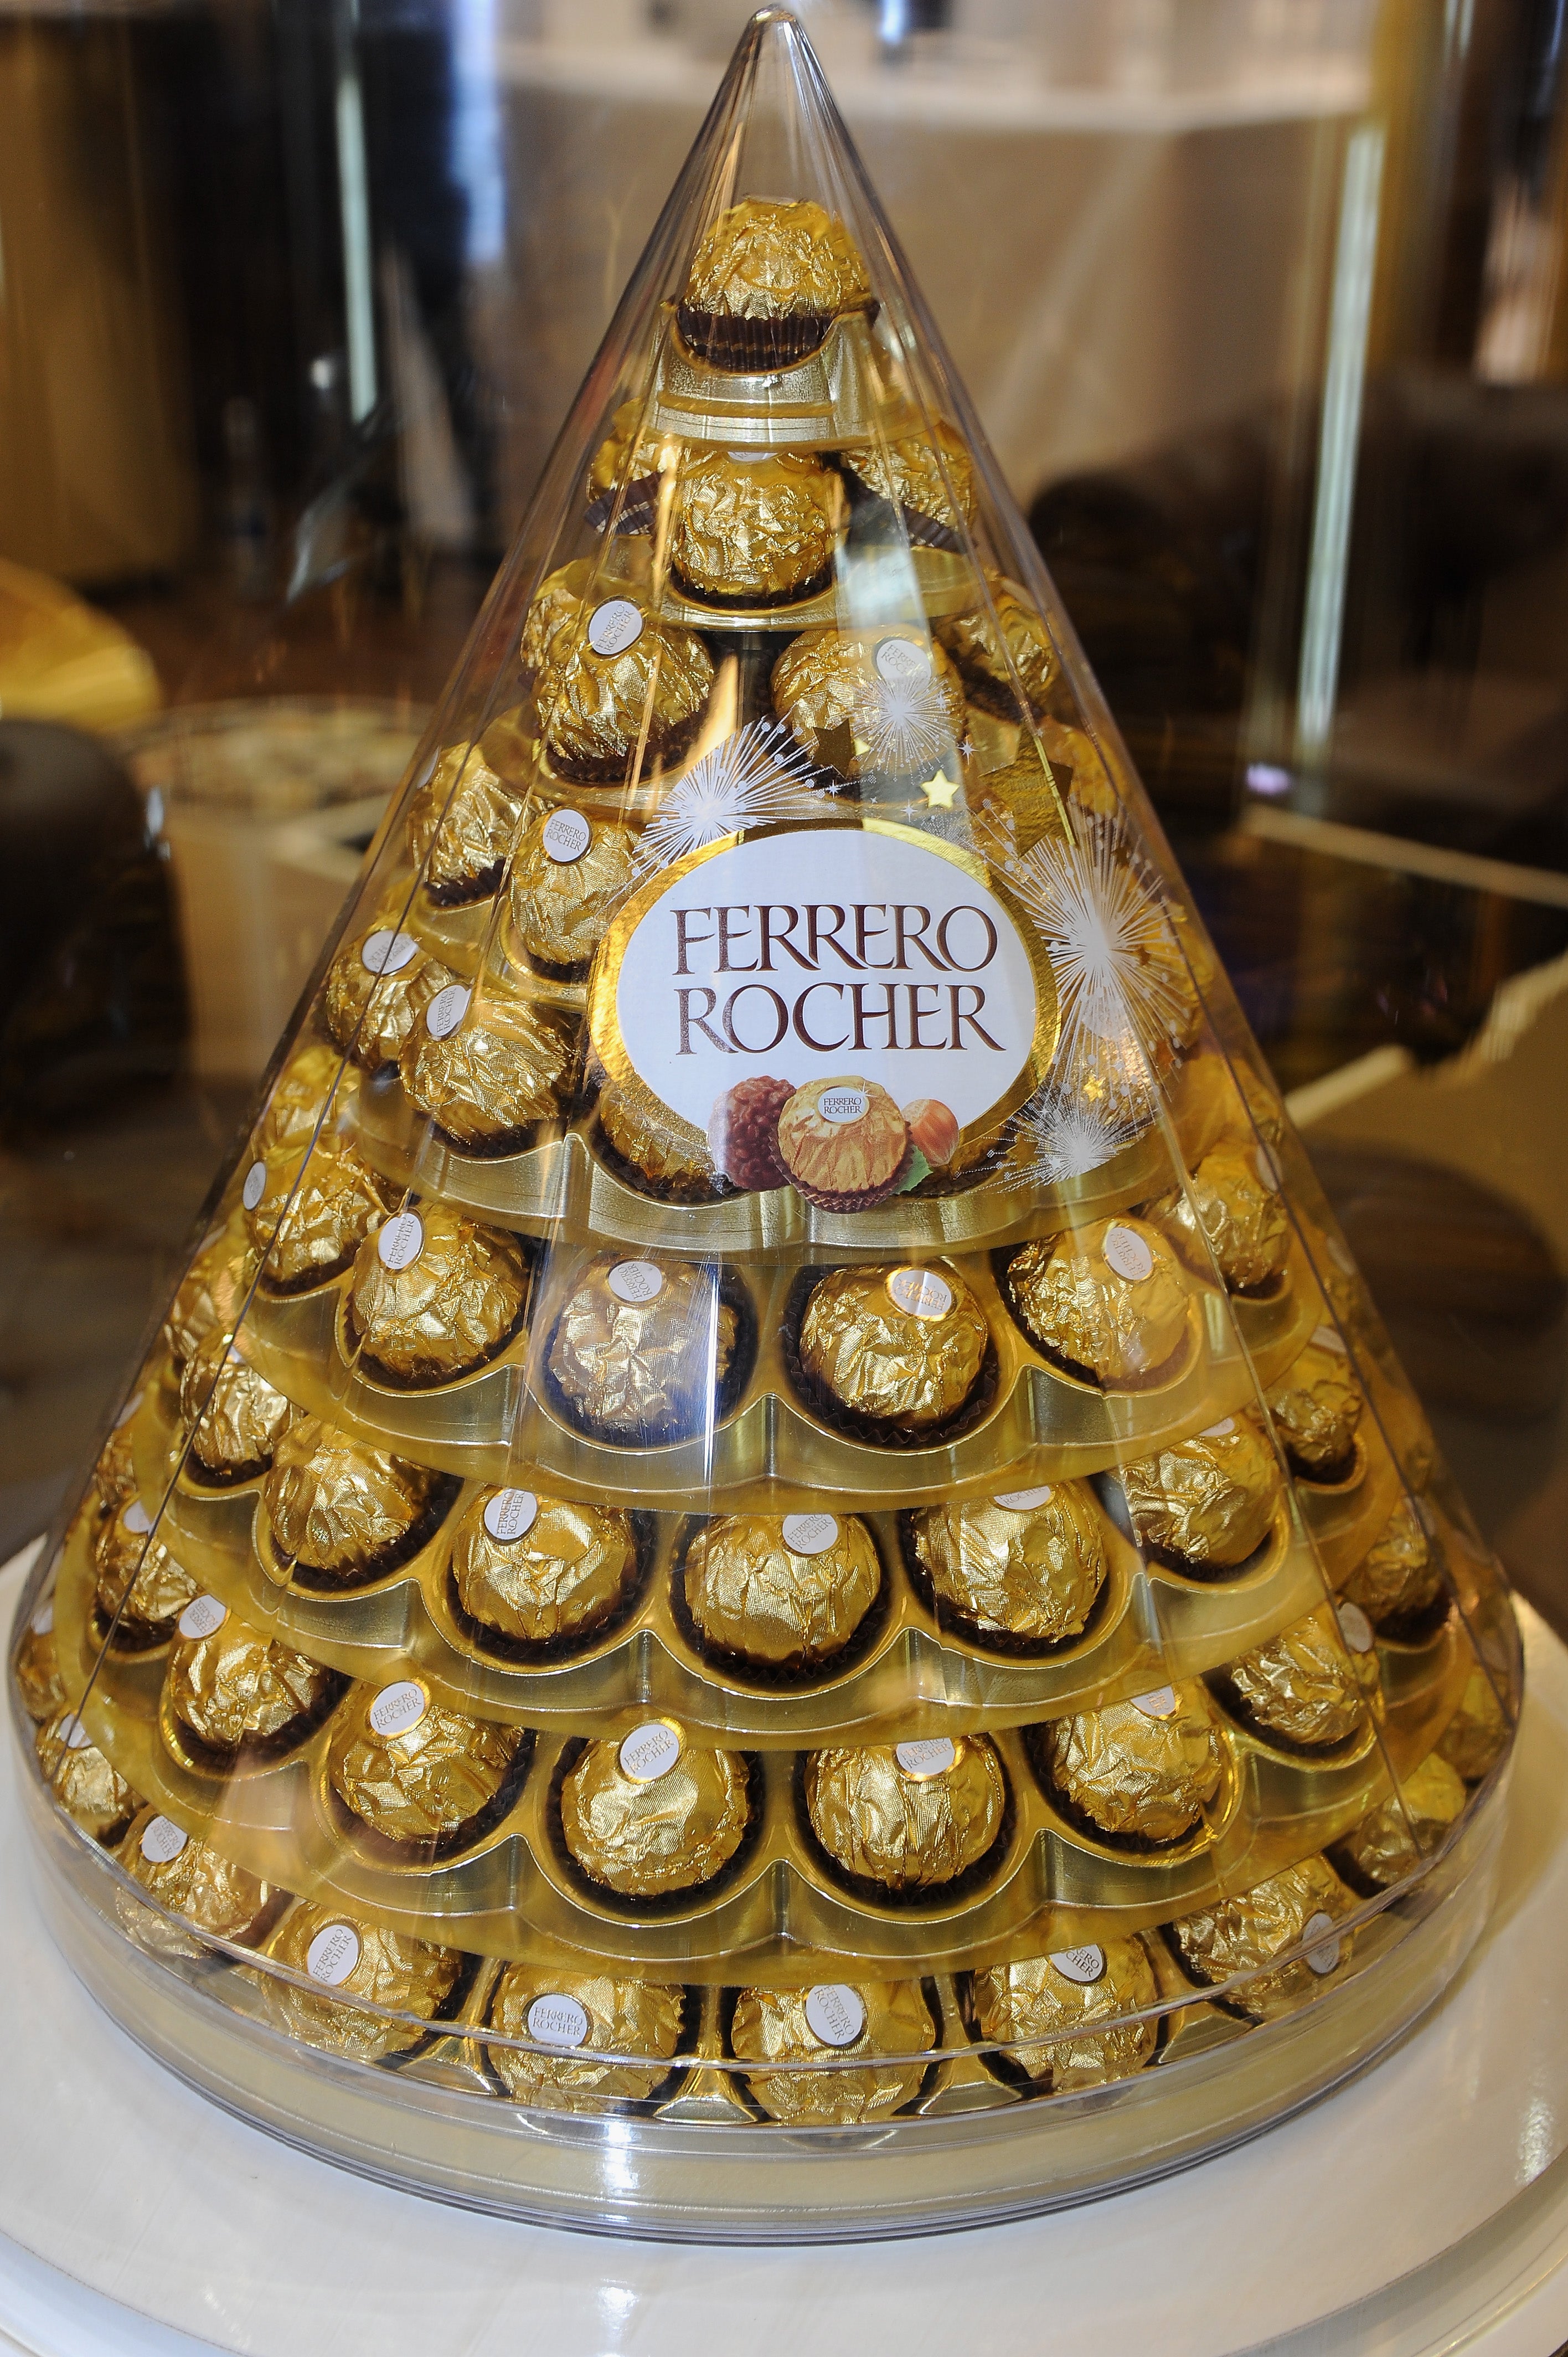 Six in 10 Ferrero Rocher chocolates are sold in the final three months of the year, according to a 2015 report